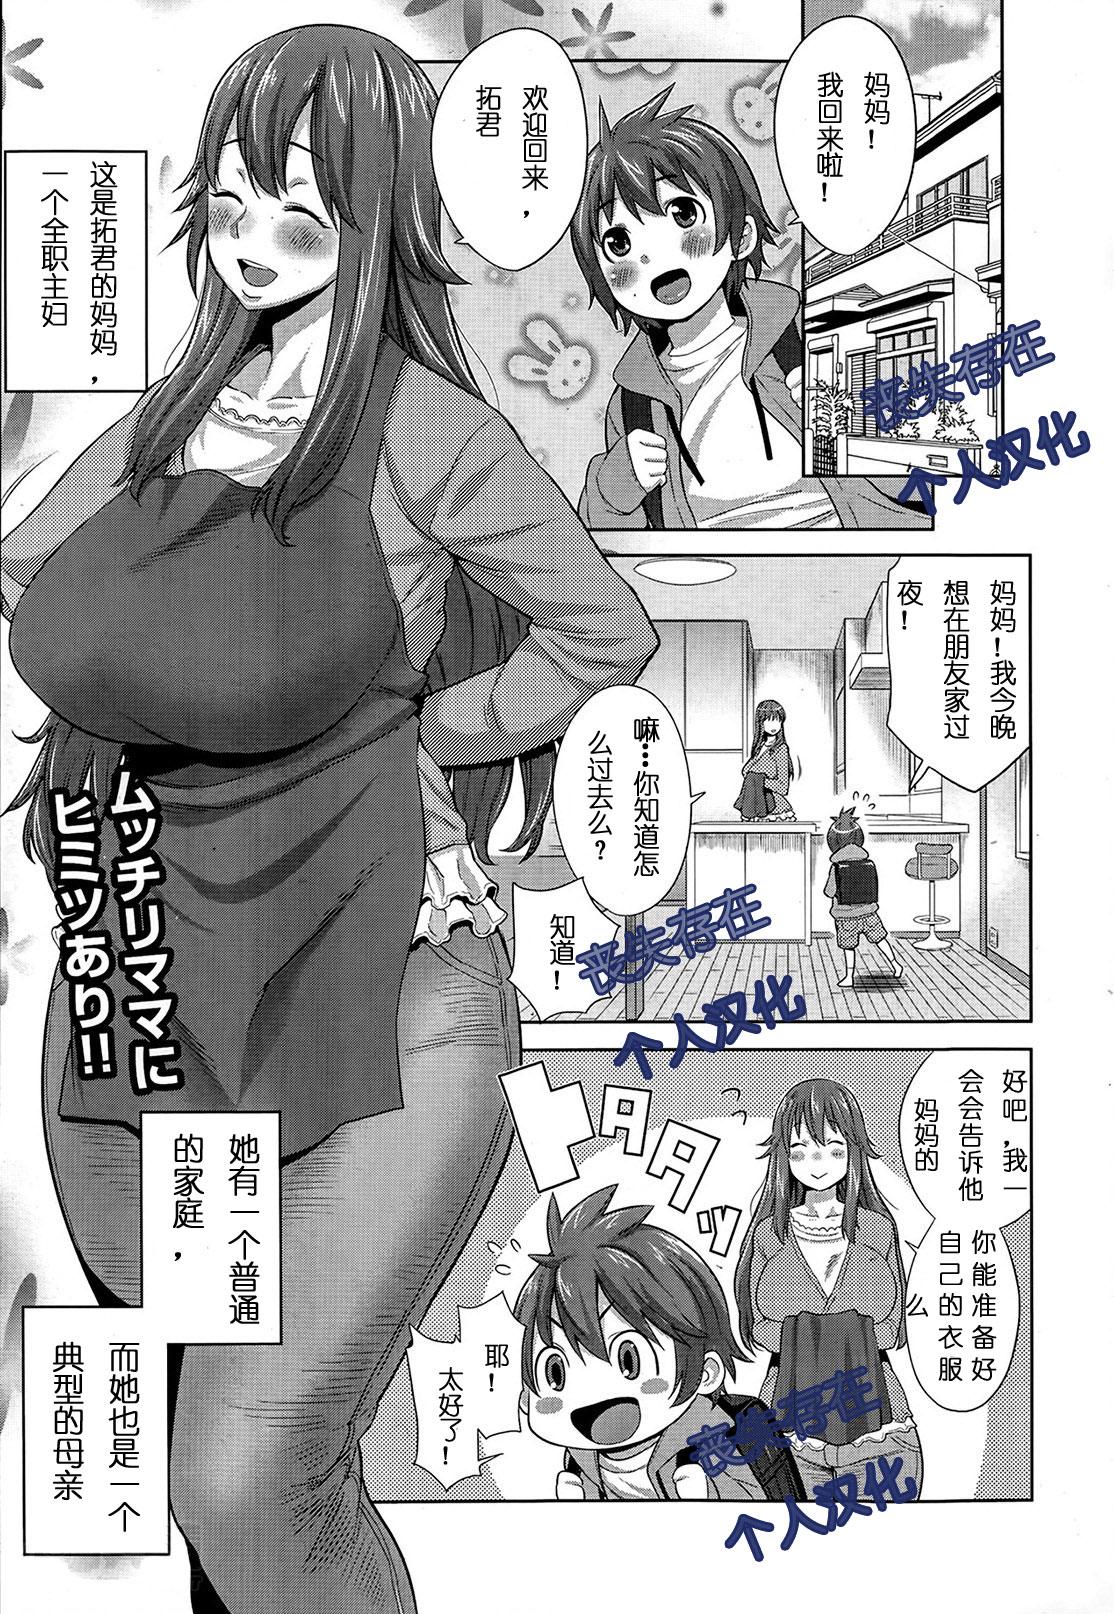 Bitch Sono Haha, Chijo ni Tsuki | This Mother is a Pervert Young Tits - Picture 1